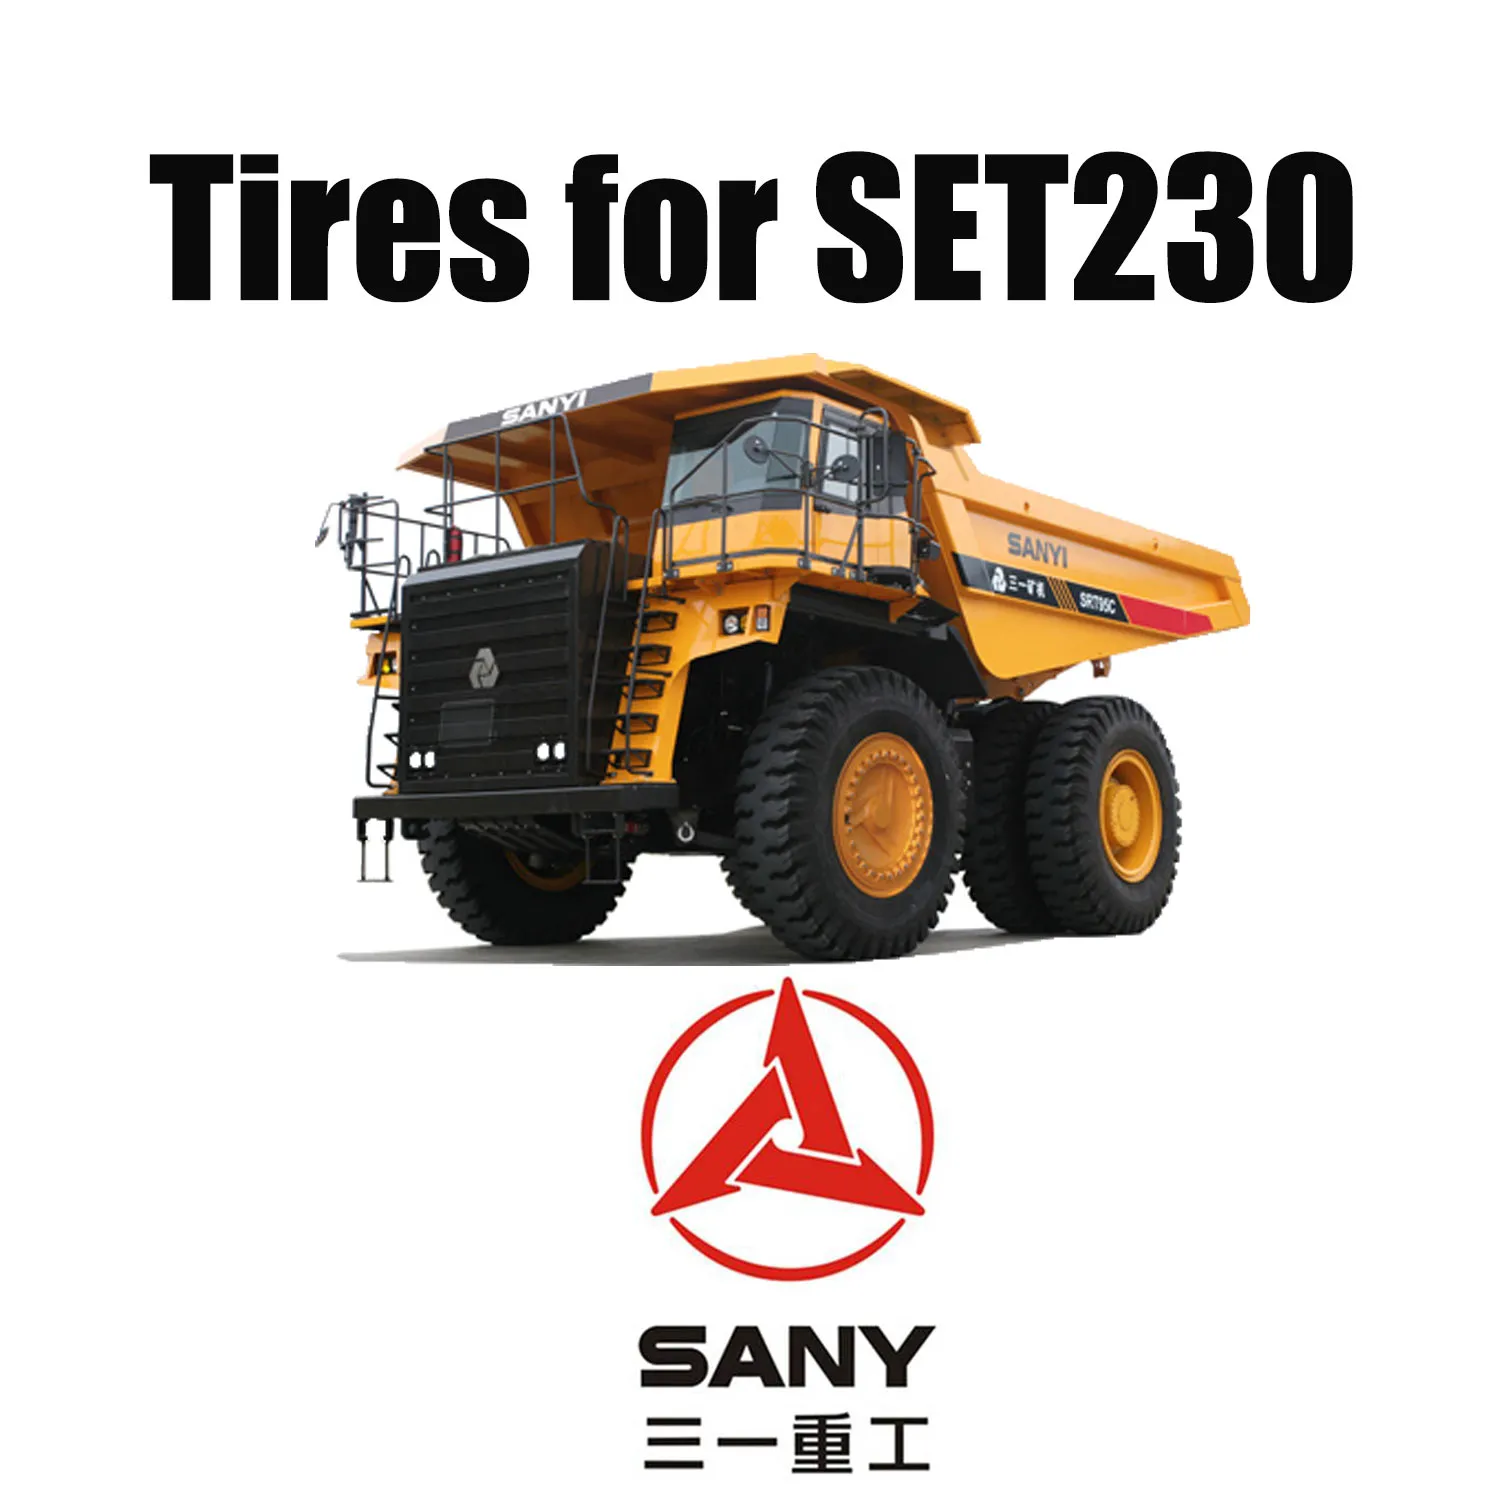 40.00R57 Radial OTR Tyres with Excellent Cut-resistant Tread for Mining Truck SANY SET230